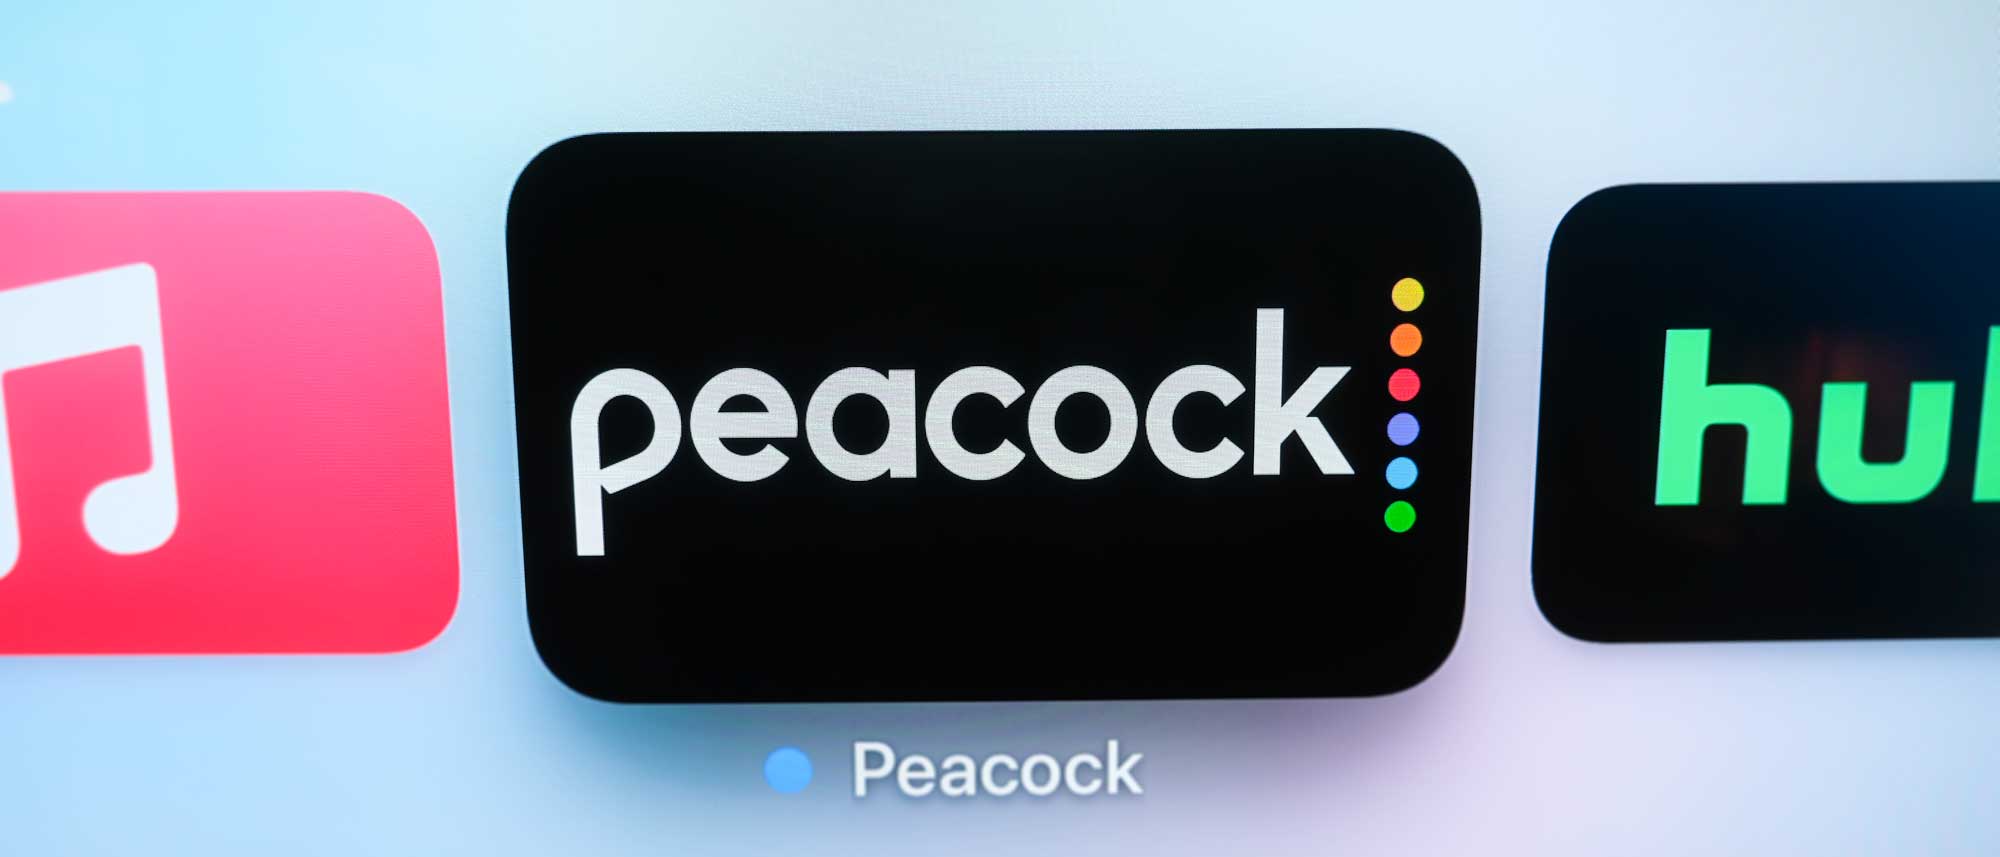 NBC's Peacock Streaming Service: Launch Date, Pricing, List Of Shows